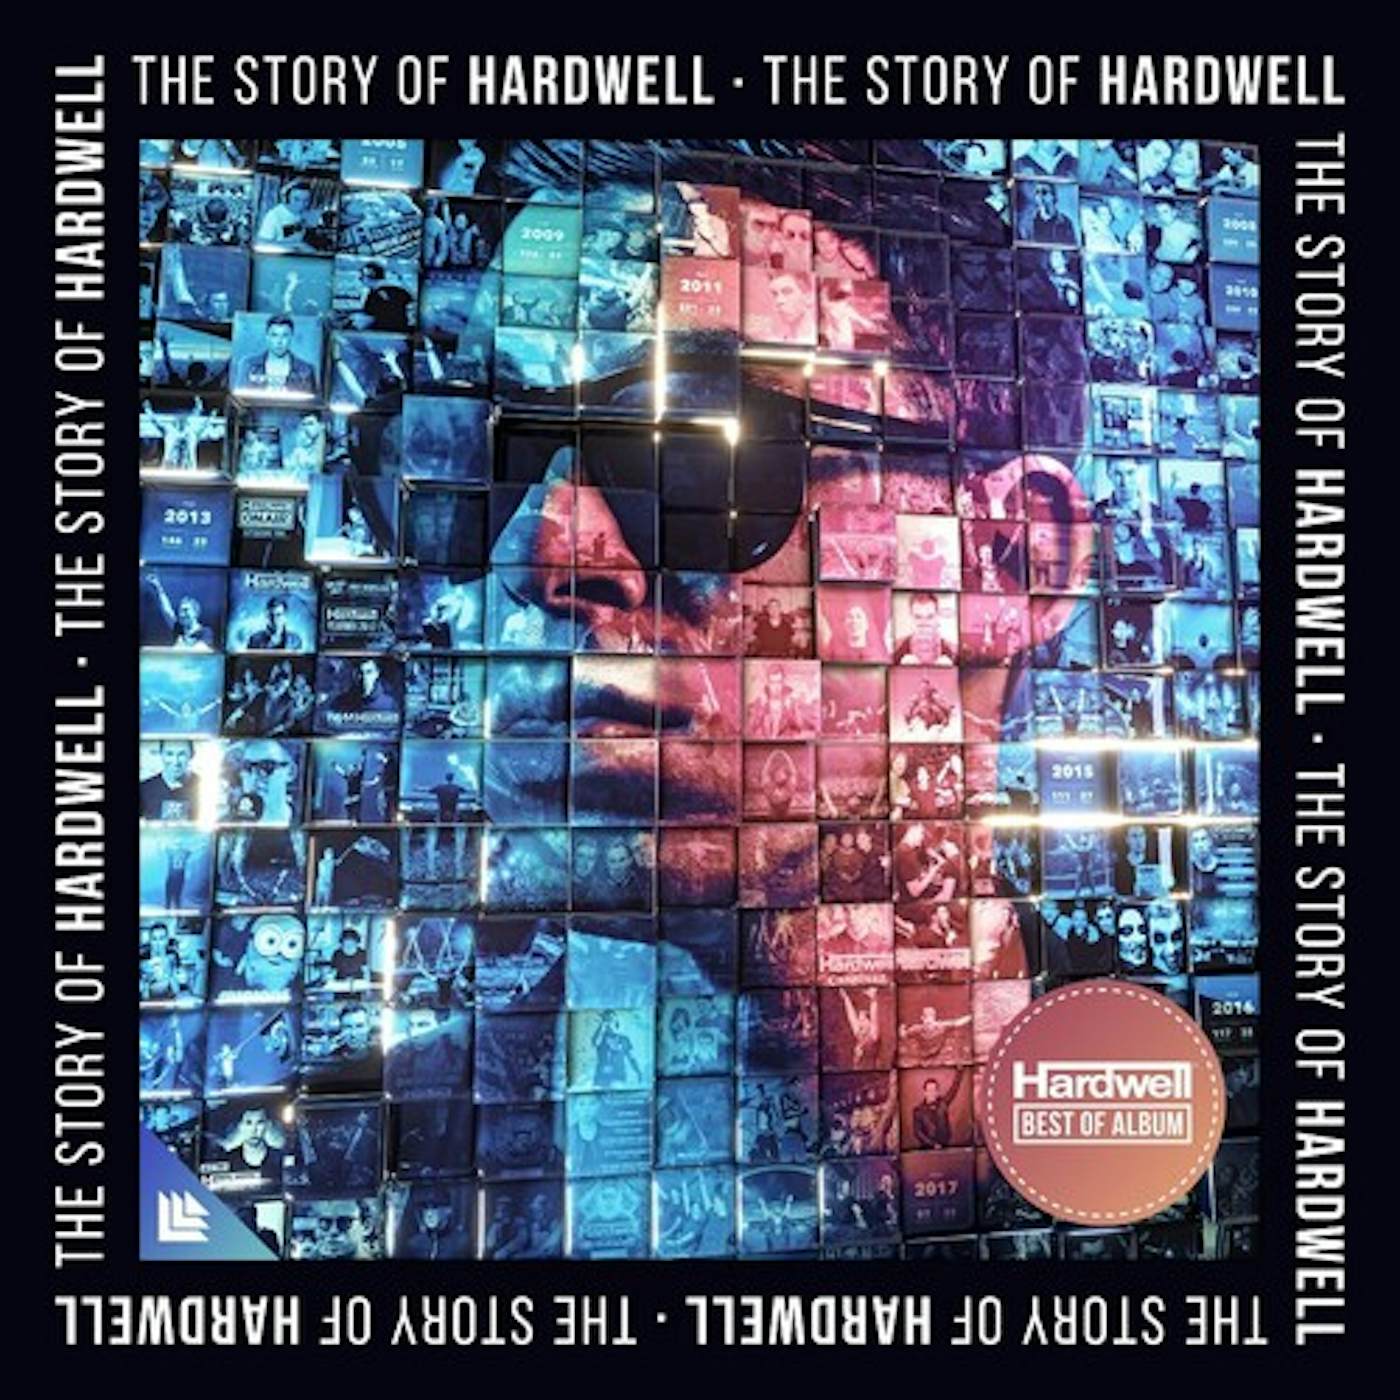 STORY OF HARDWELL (BEST OF) CD